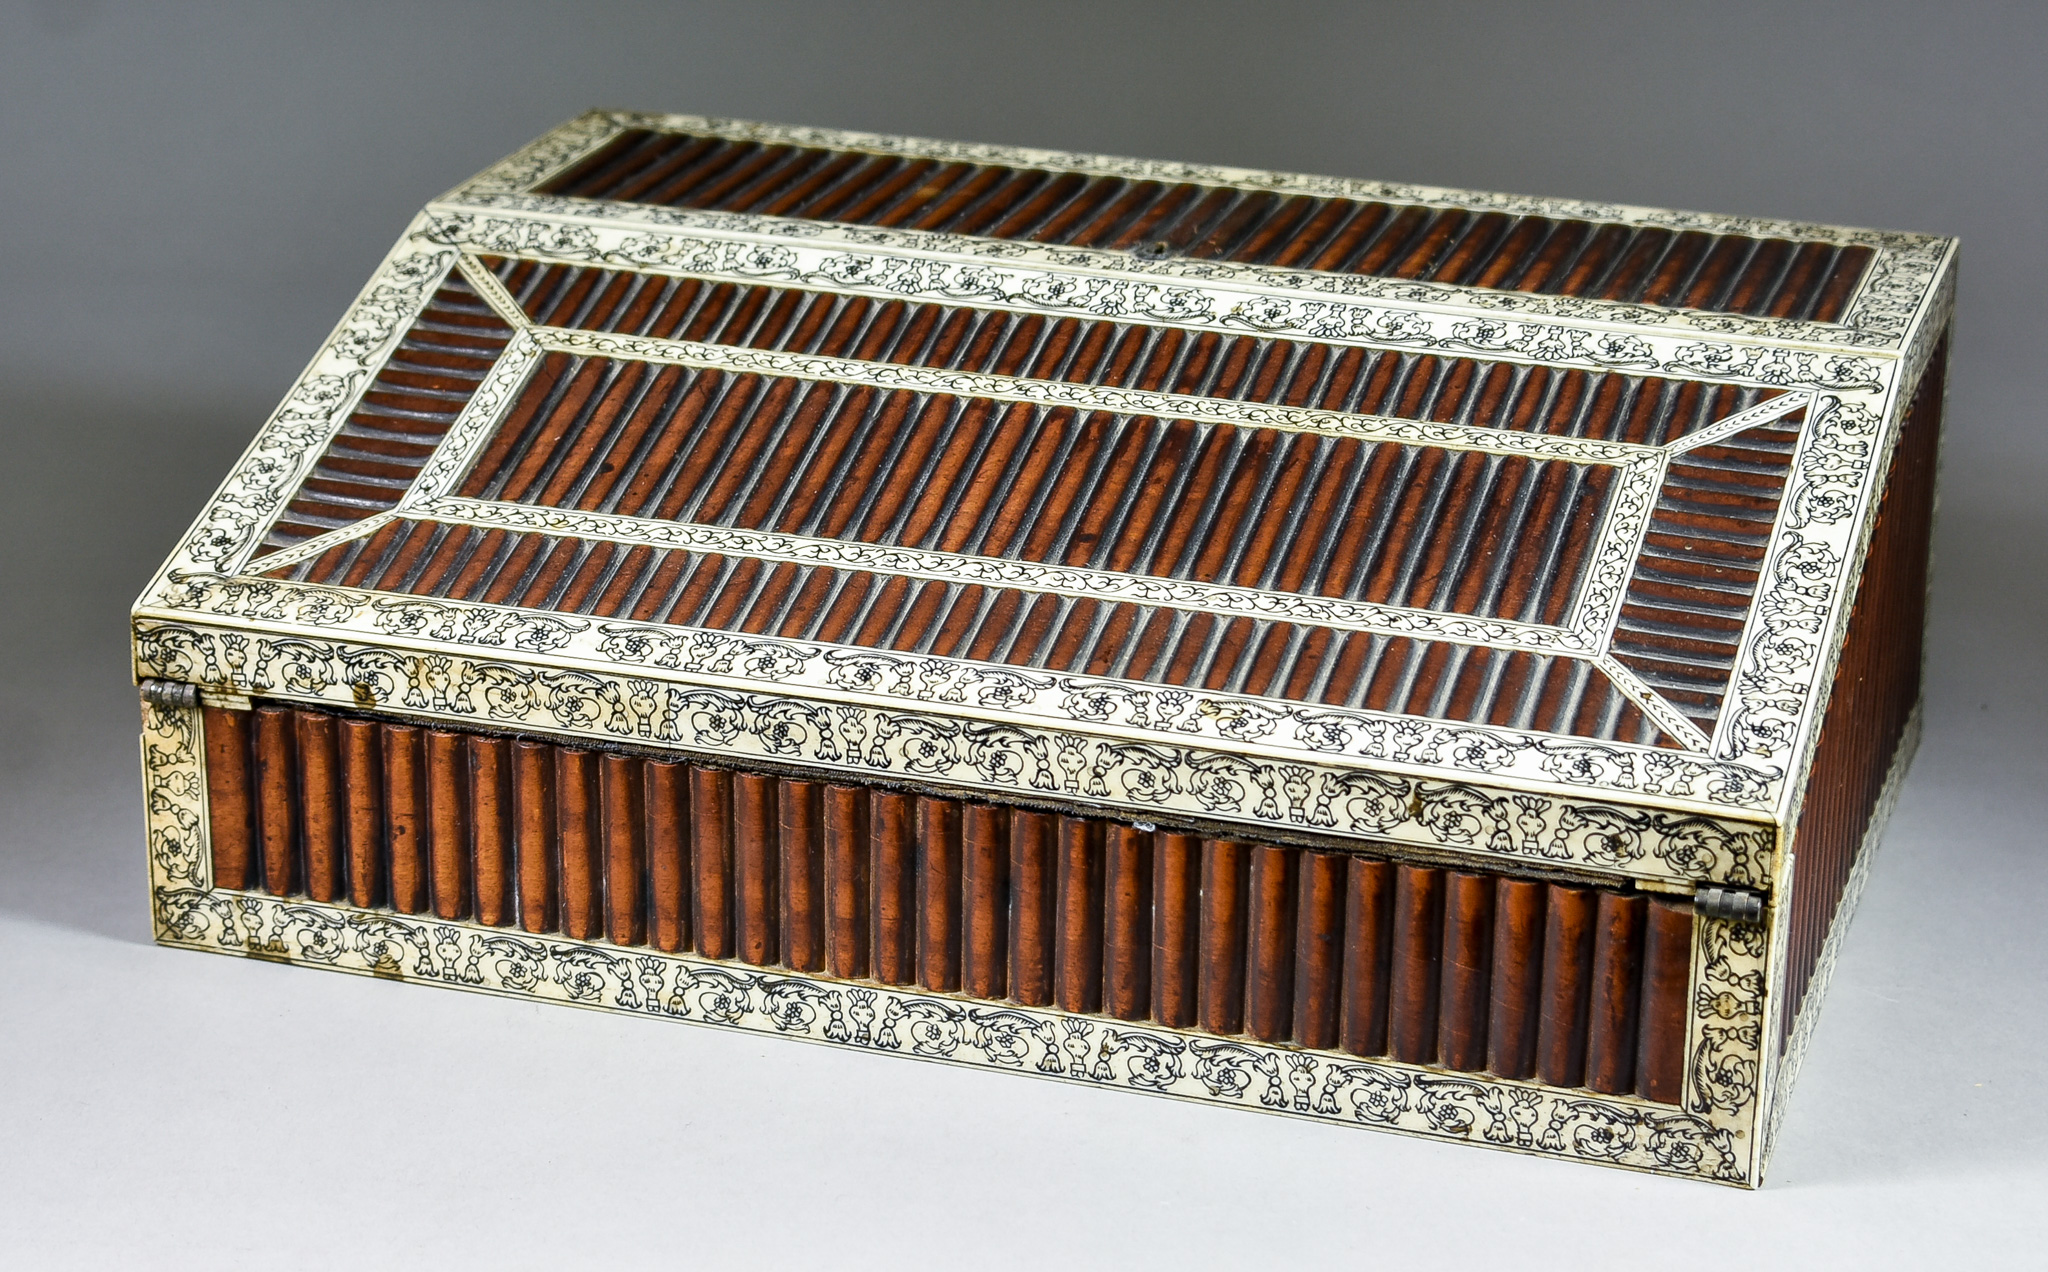 An Anglo-Indian Vizaghapatam Hardwood and Engraved Bone Writing Slope, the lifting top revealing